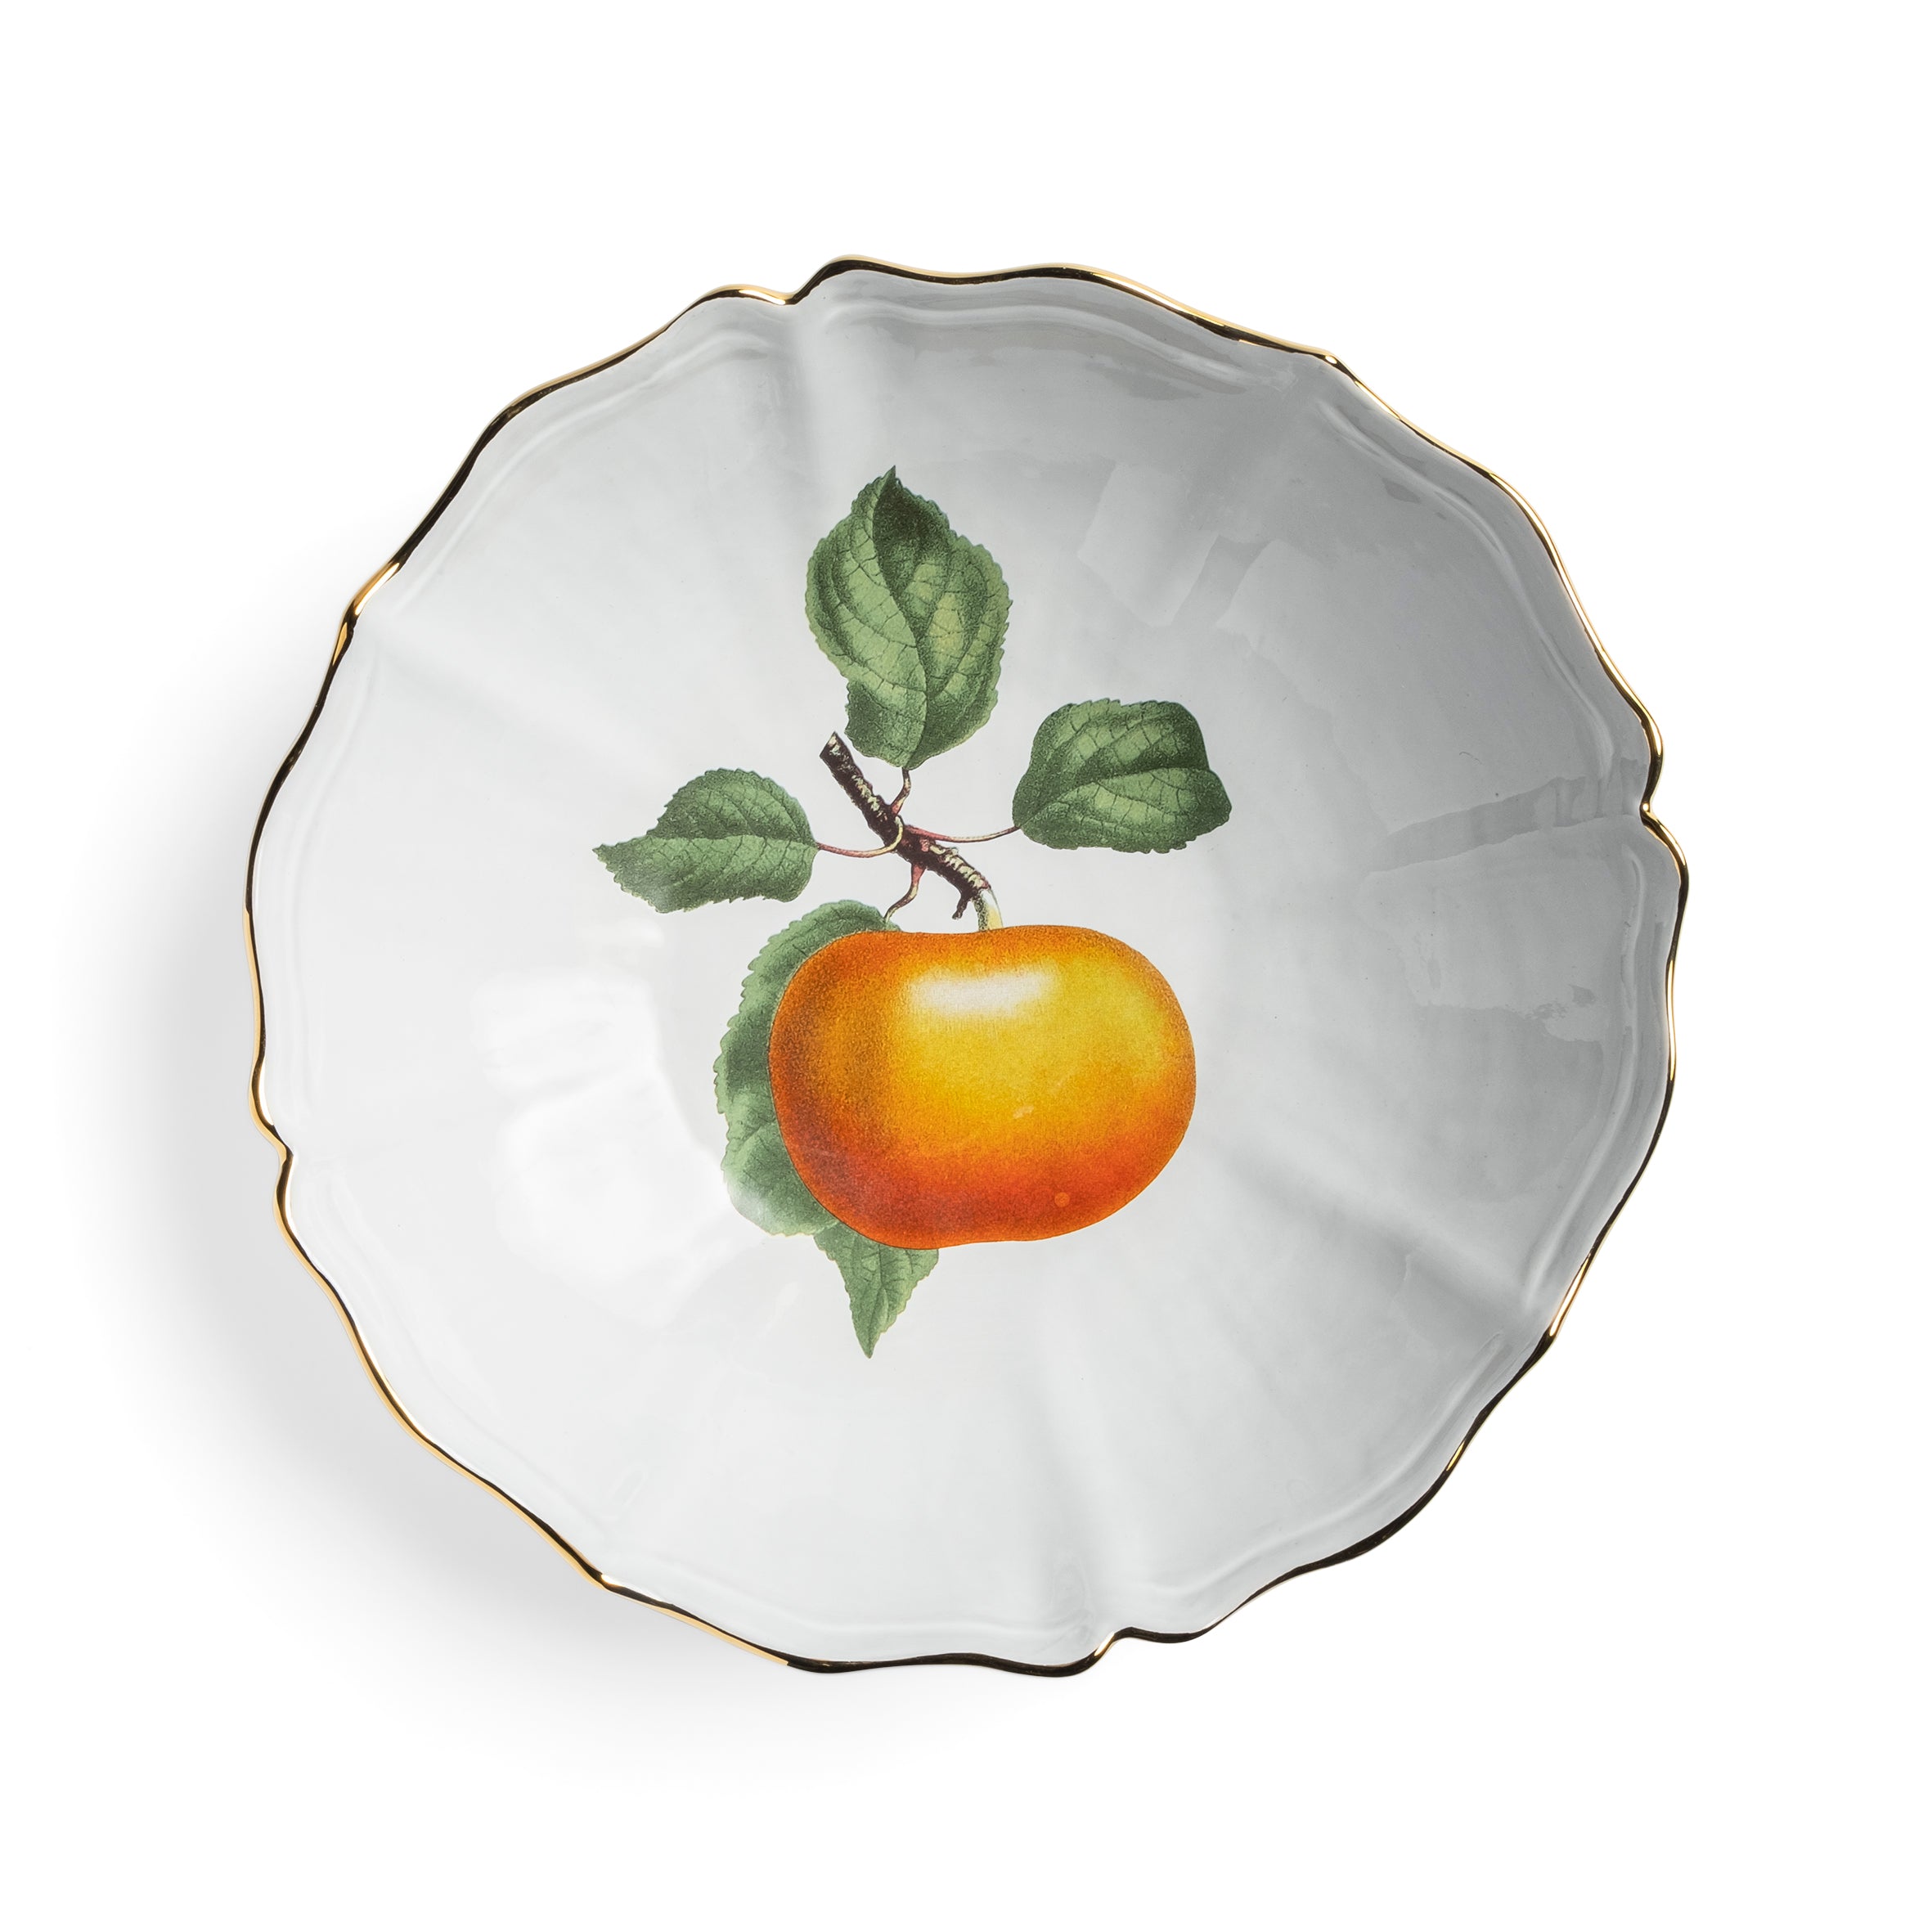 Vieux Apple Bowl, shop the best gift gifts for her for him from Inna carton online store dubai, UAE!